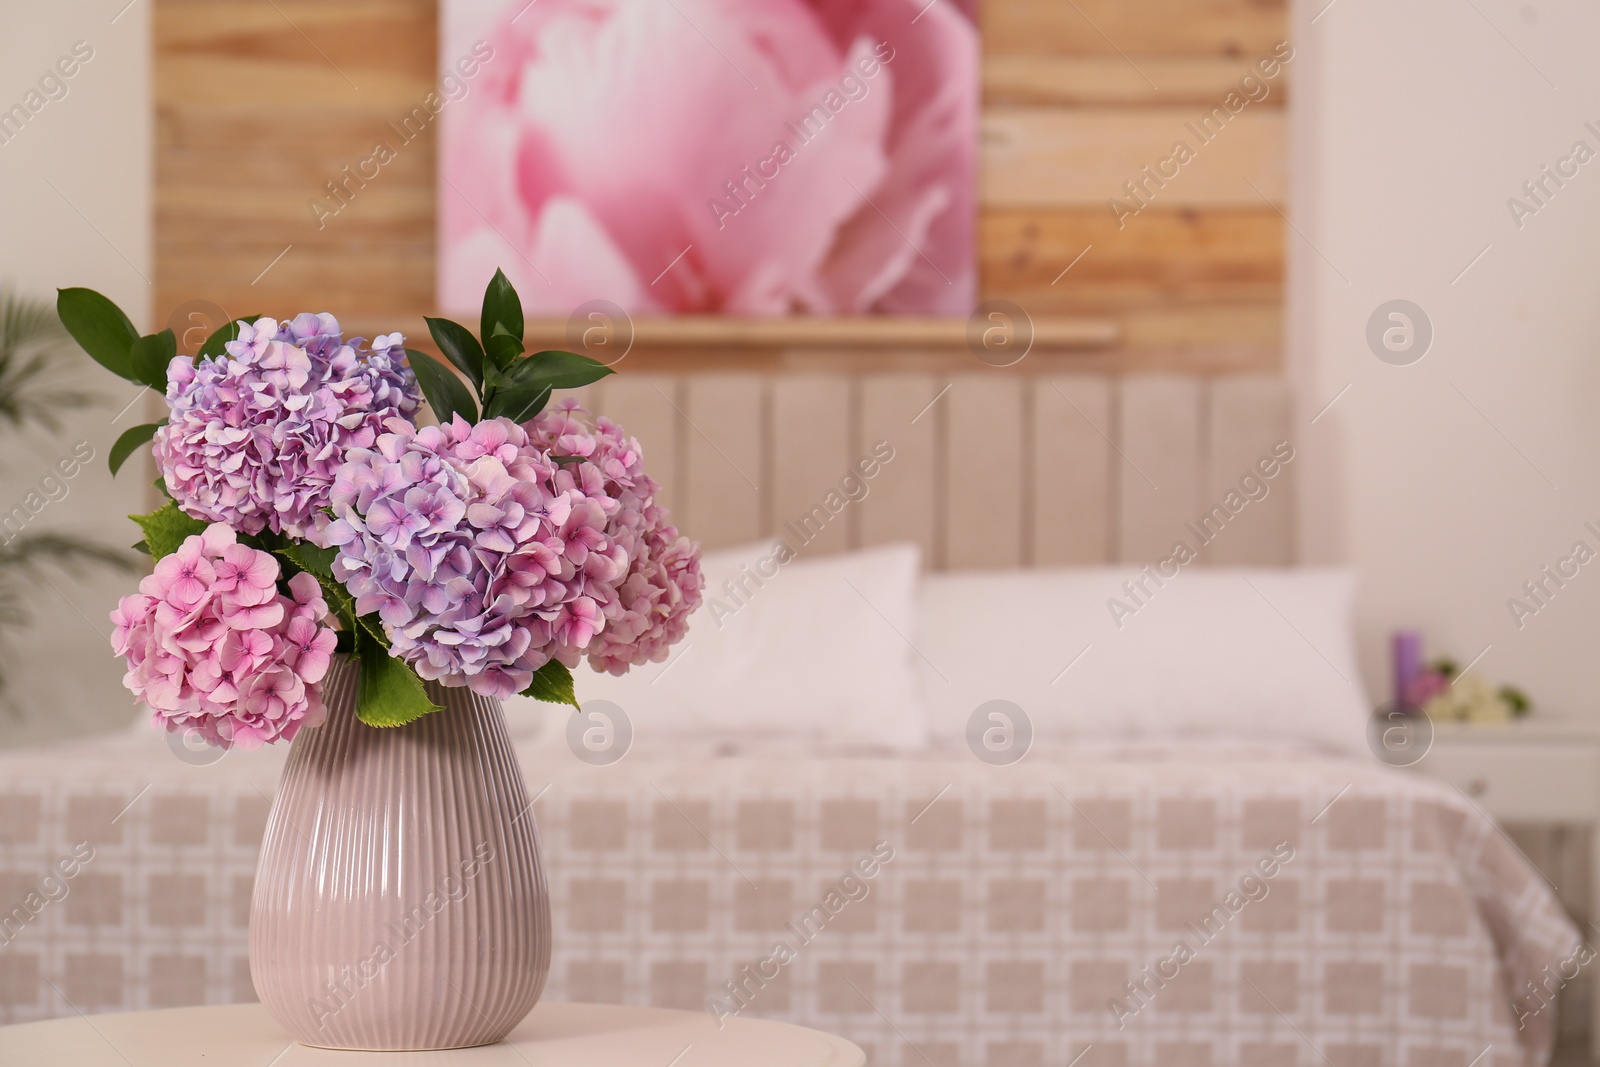 Photo of Bouquet of beautiful hydrangea flowers on table in bedroom, space for text. Interior design